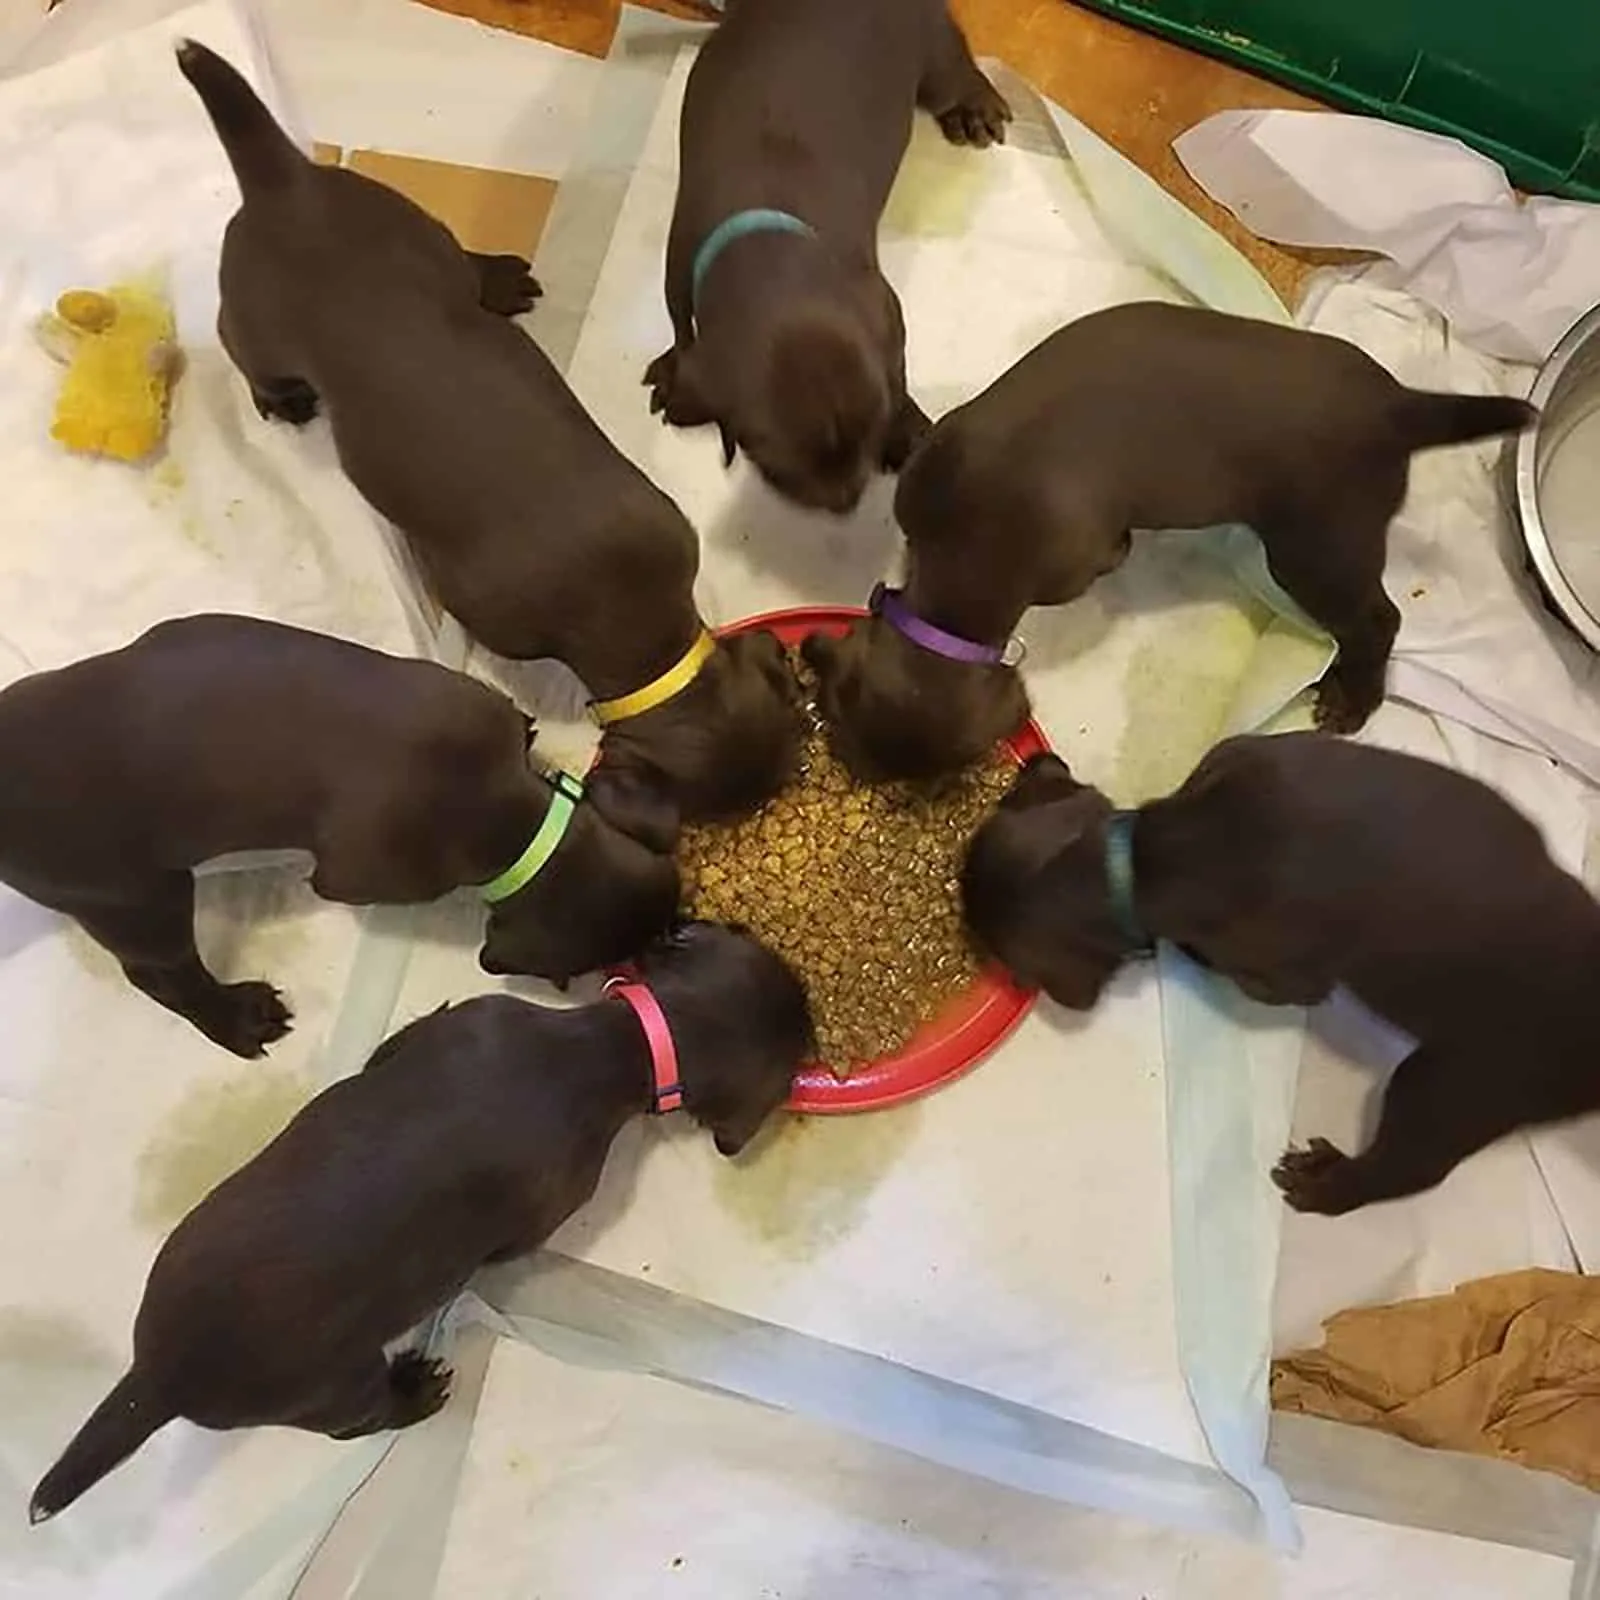 six pudelpointer puppies eating from a bowl